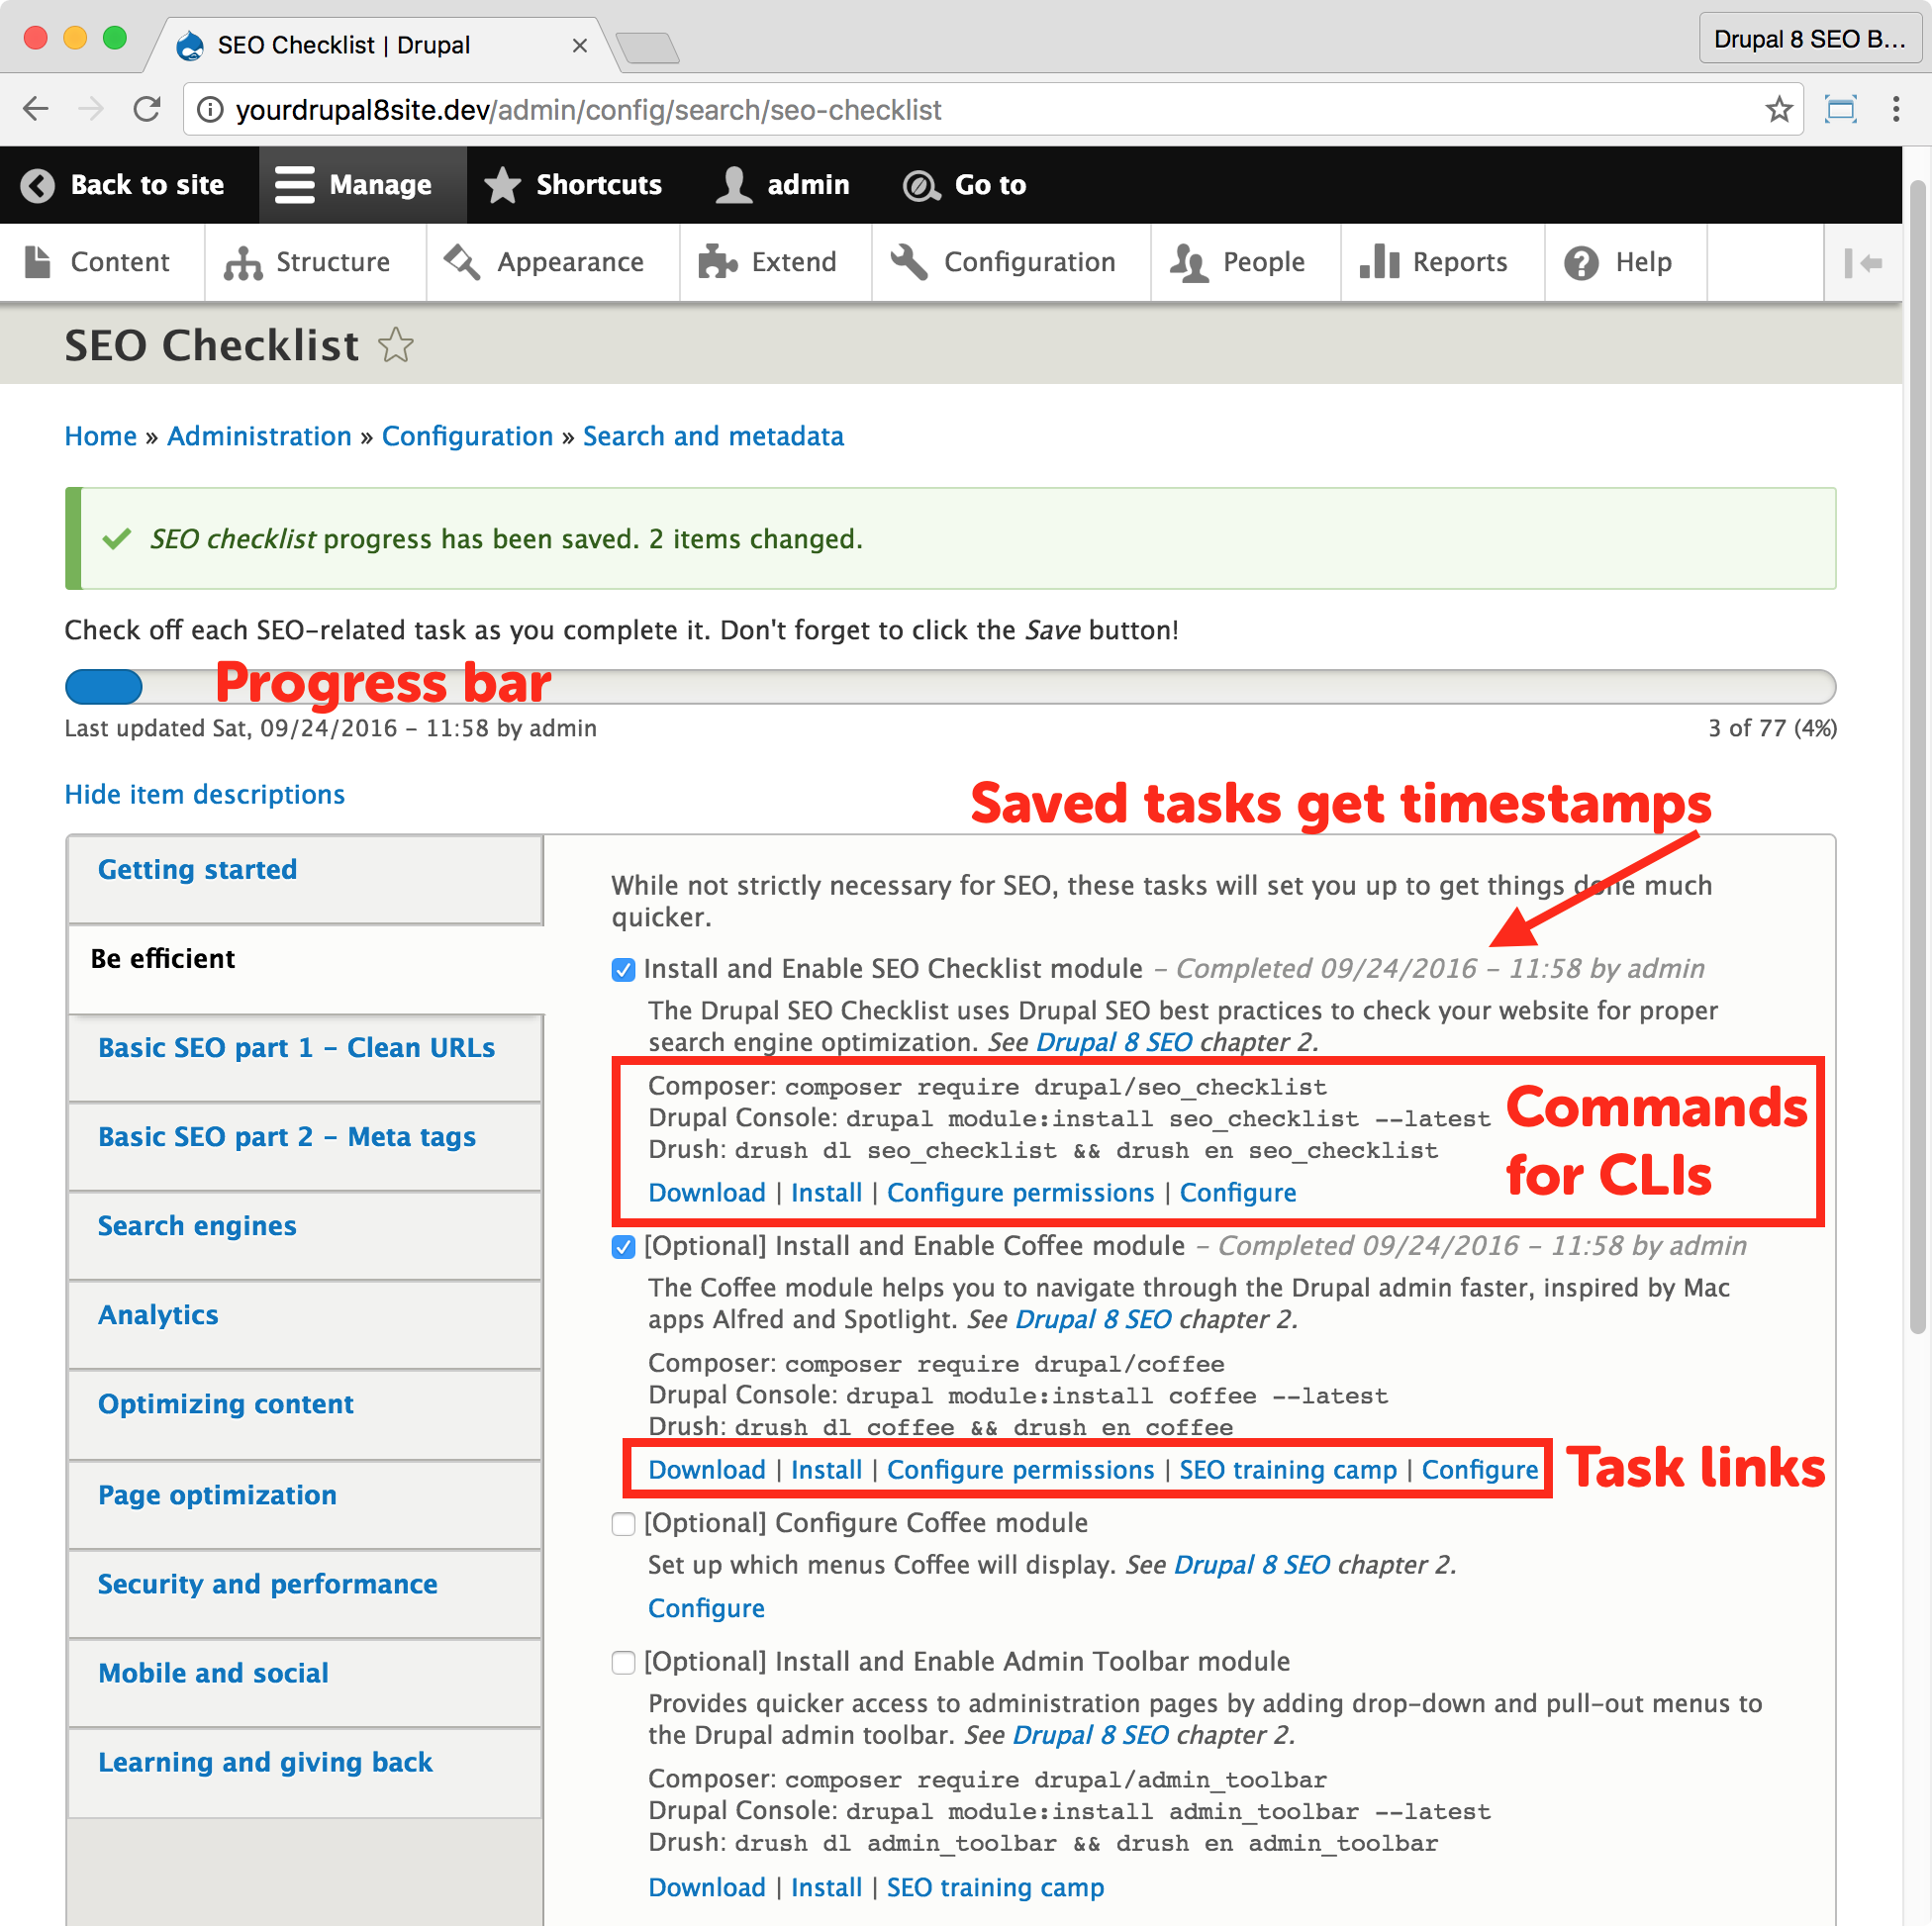 Drupal SEO modules: SEO Checklist contributed Drupal module - another configuration screen